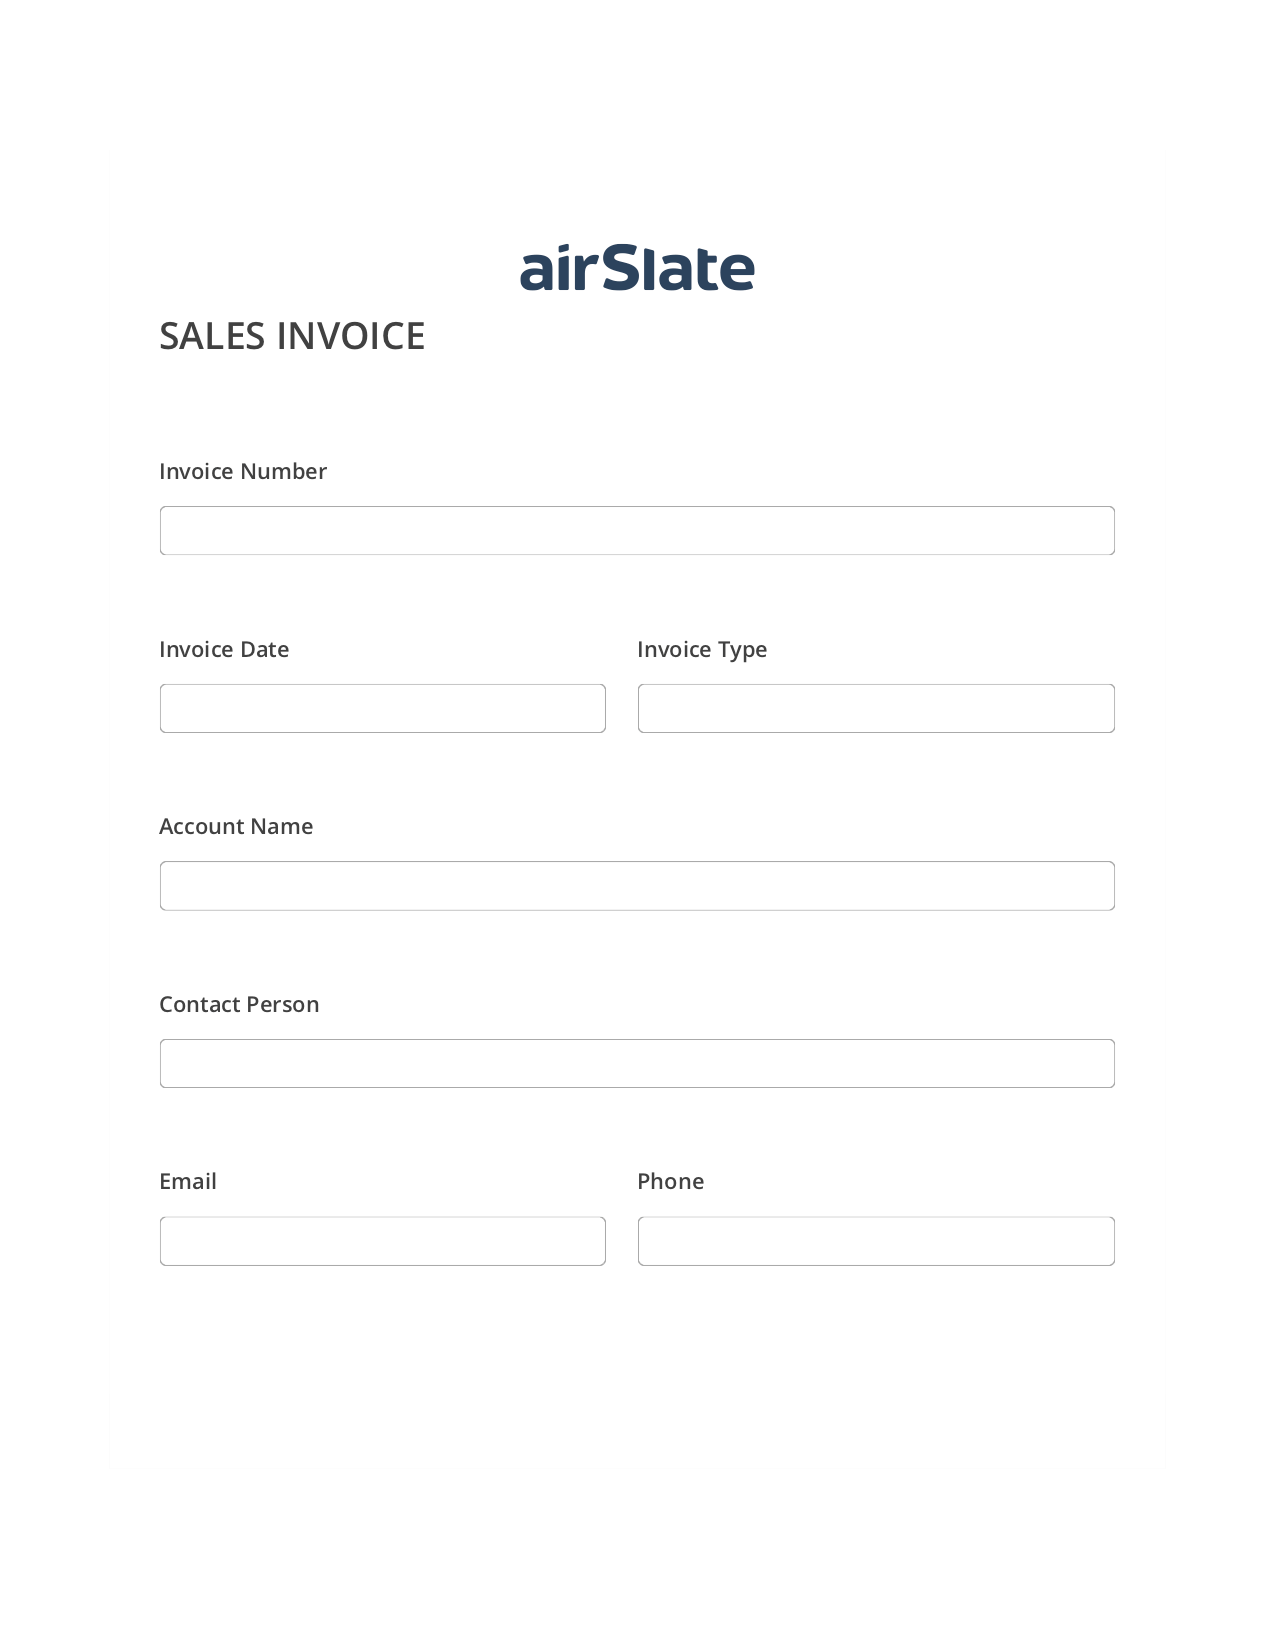 Sales Invoice Workflow Pre-fill Dropdowns from Google Sheet Bot, Create Salesforce Records Bot, Archive to SharePoint Folder Bot